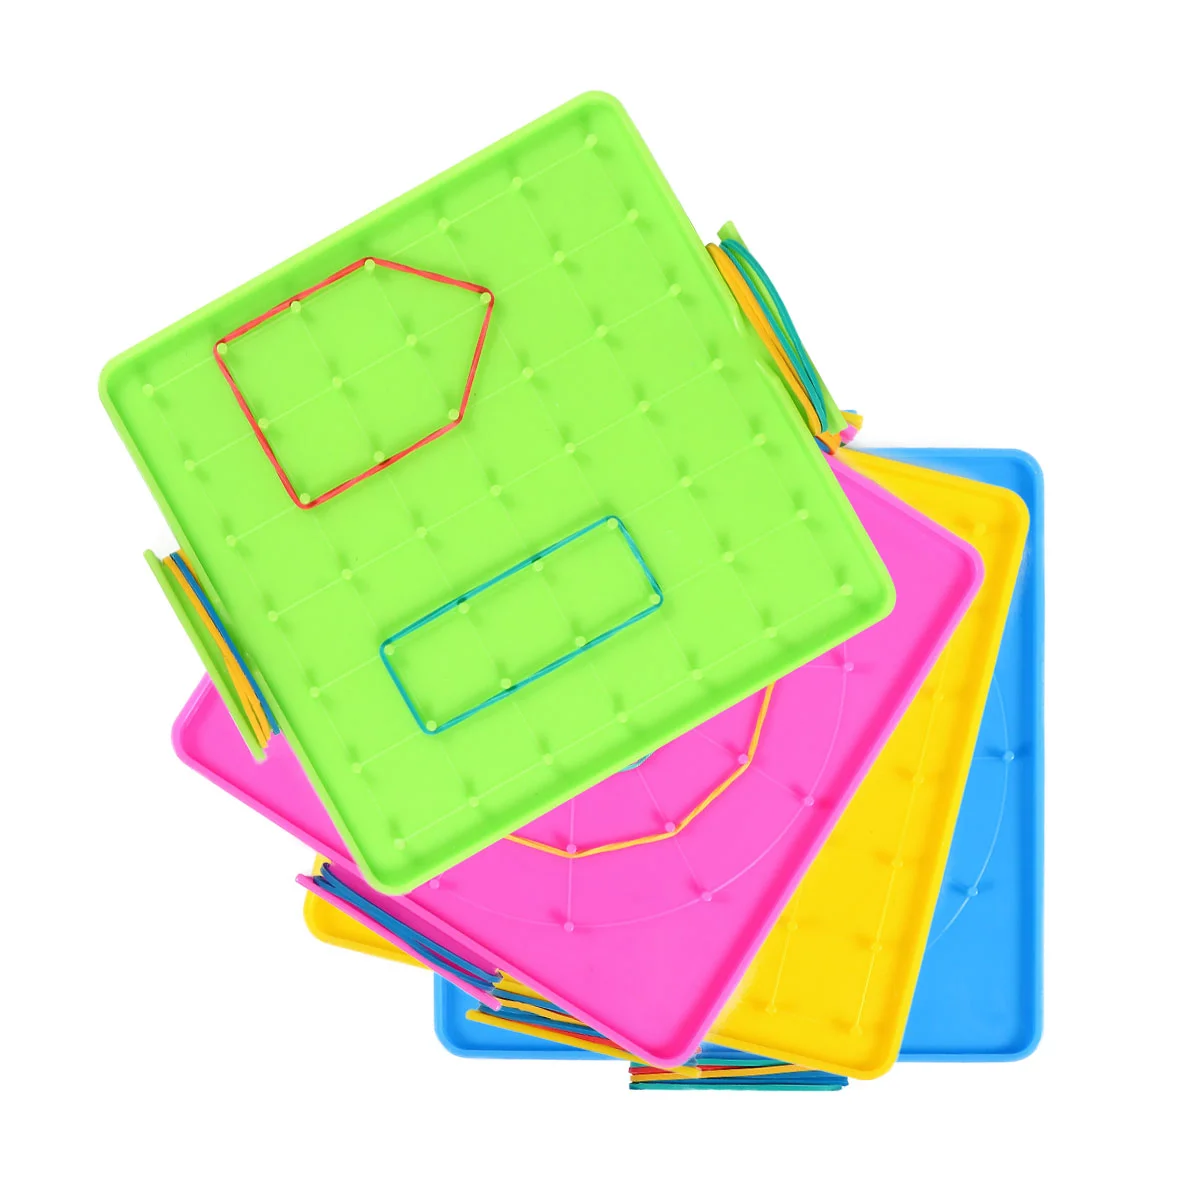 

Geoboard Learning Material Geometric Geoboards Toys Double-sided Geoboard Plastic Geoboard Toy Kids Early Learning Toys